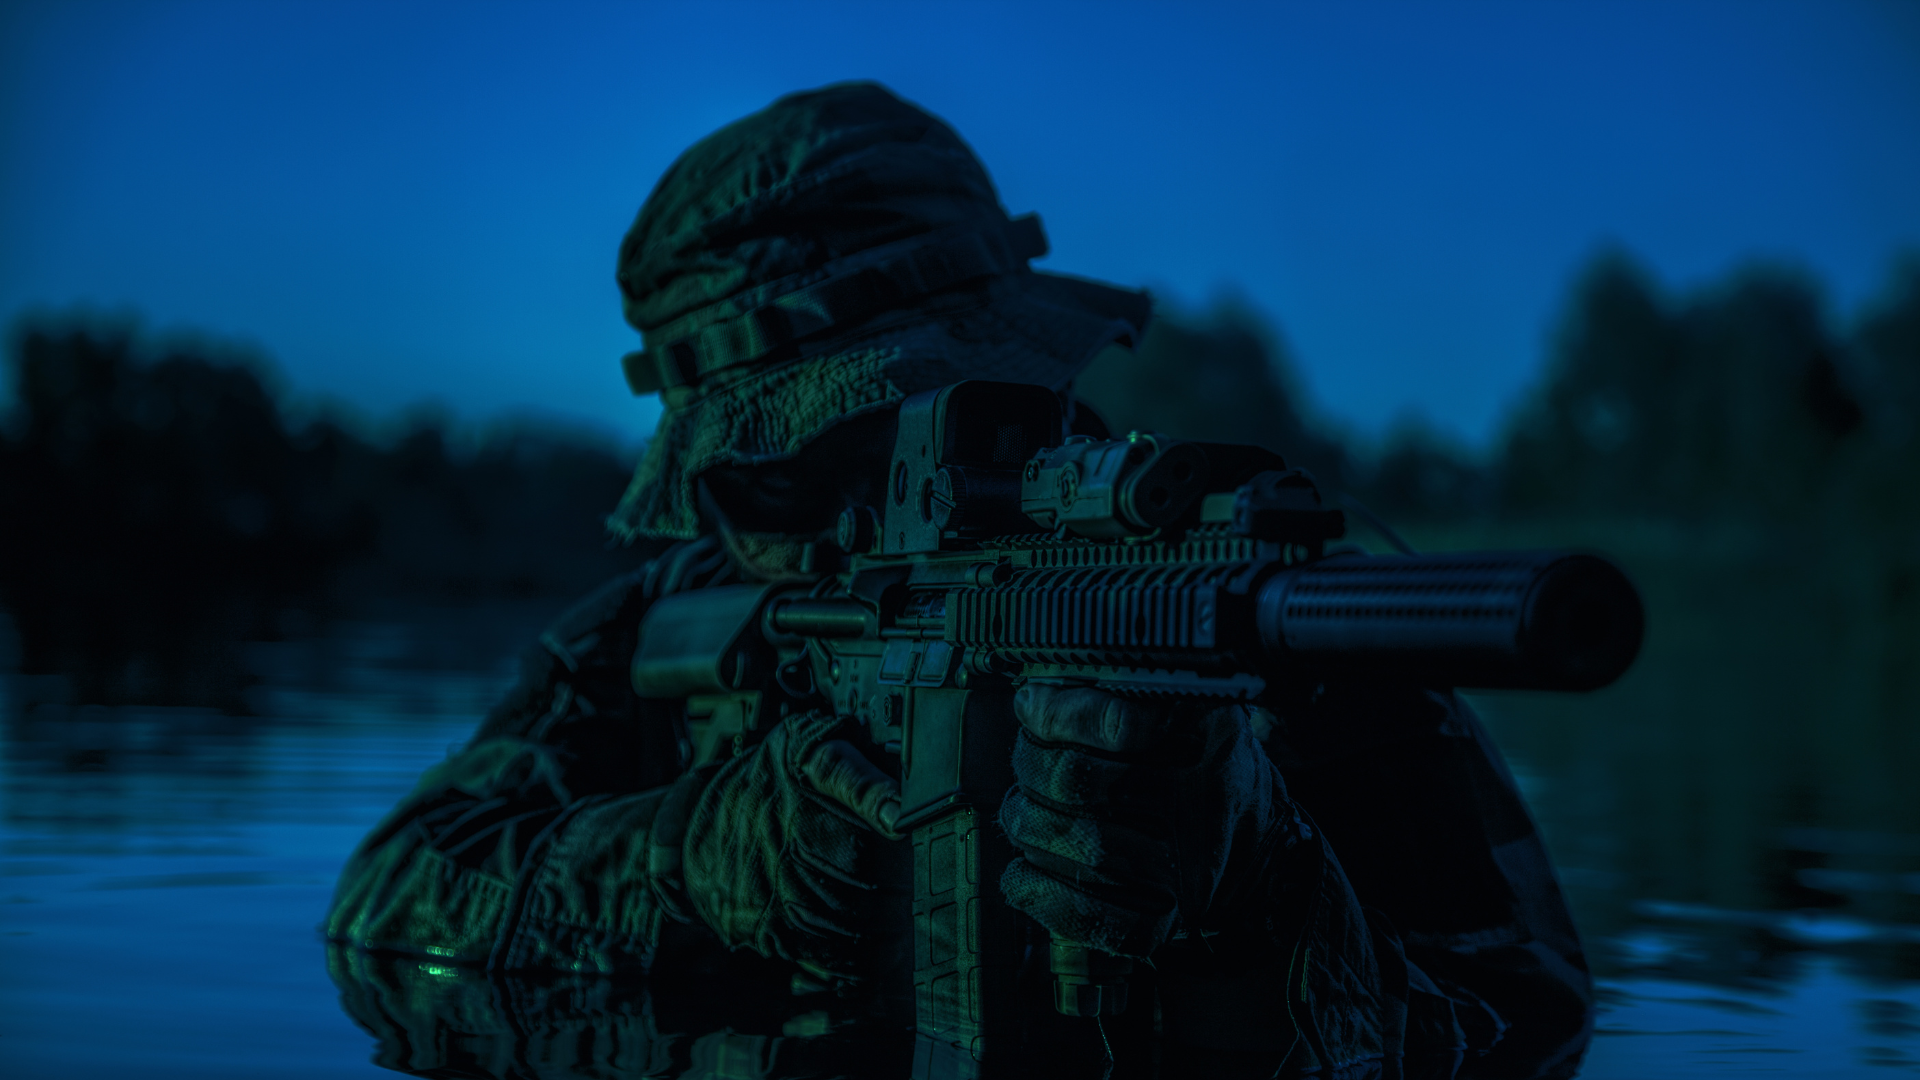 soldier at night in river night view